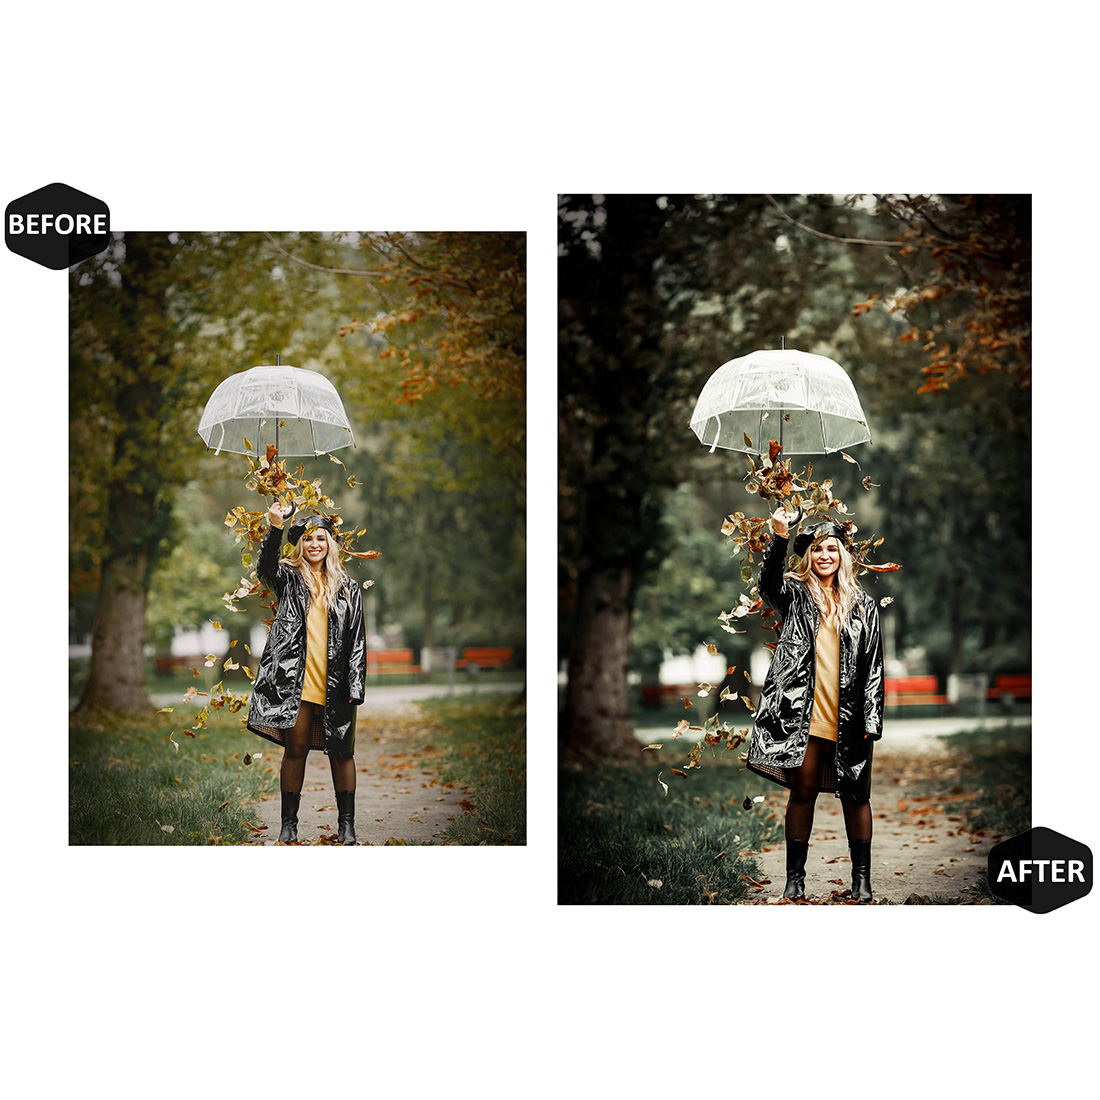 12 Photoshop Actions, Autumn Rustle Ps Action, Leaves ACR Editing, Moody Ps Filter, Atn Portrait And style Theme For Instagram, Blogger preview image.